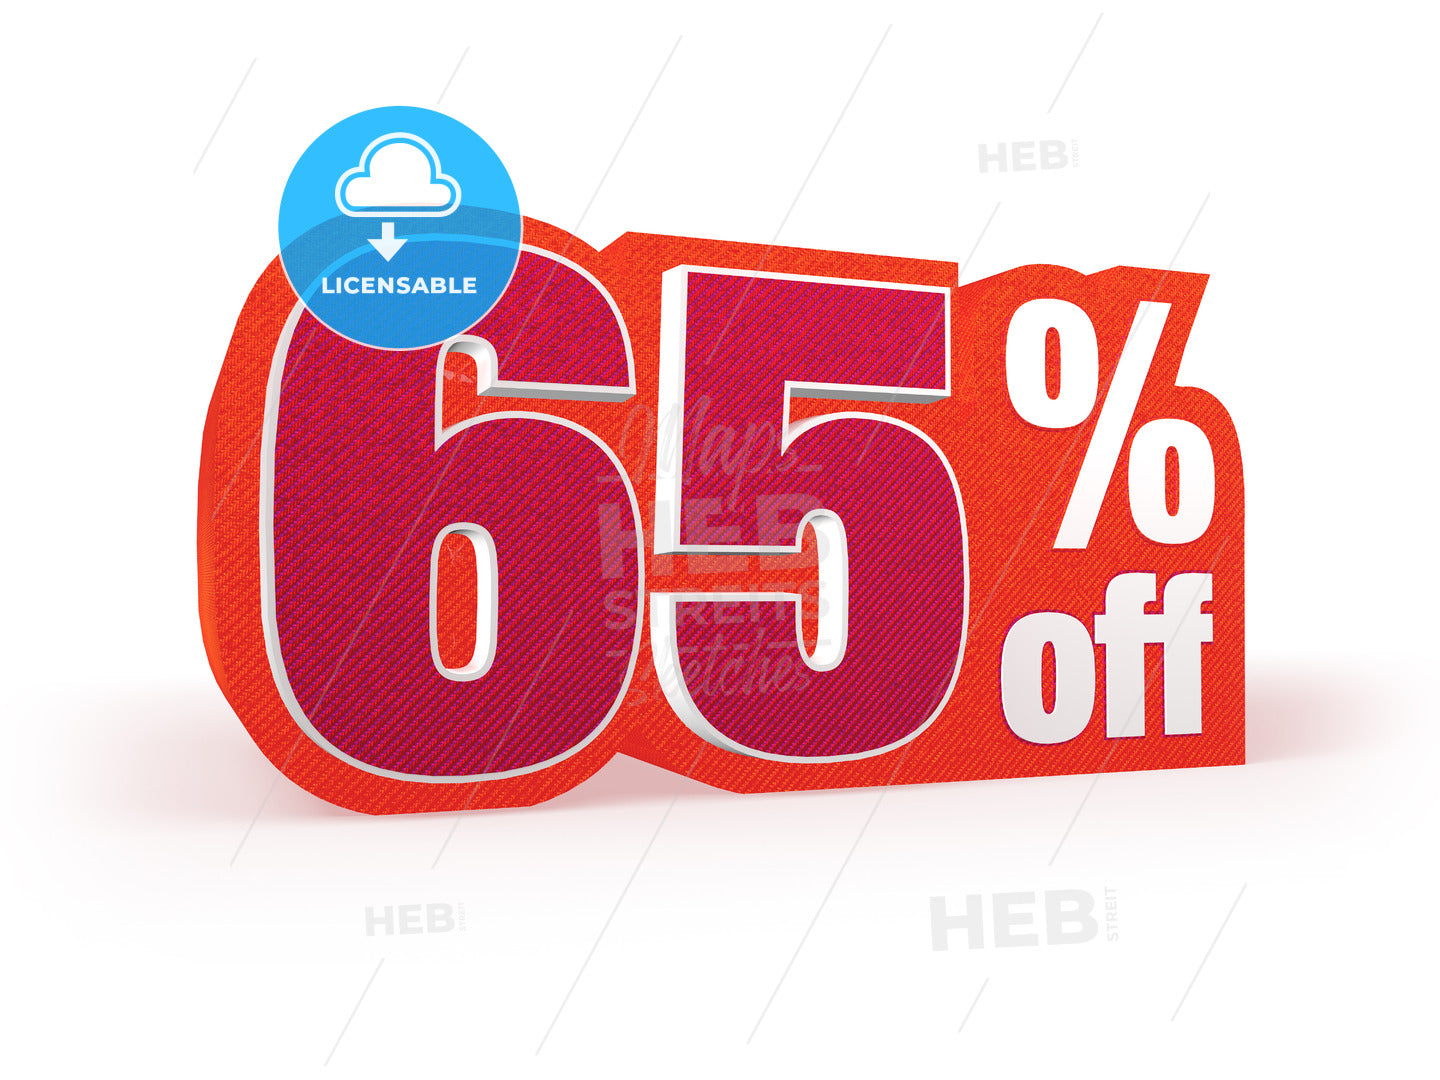 65 percent off red wool styled discount price sign – instant download